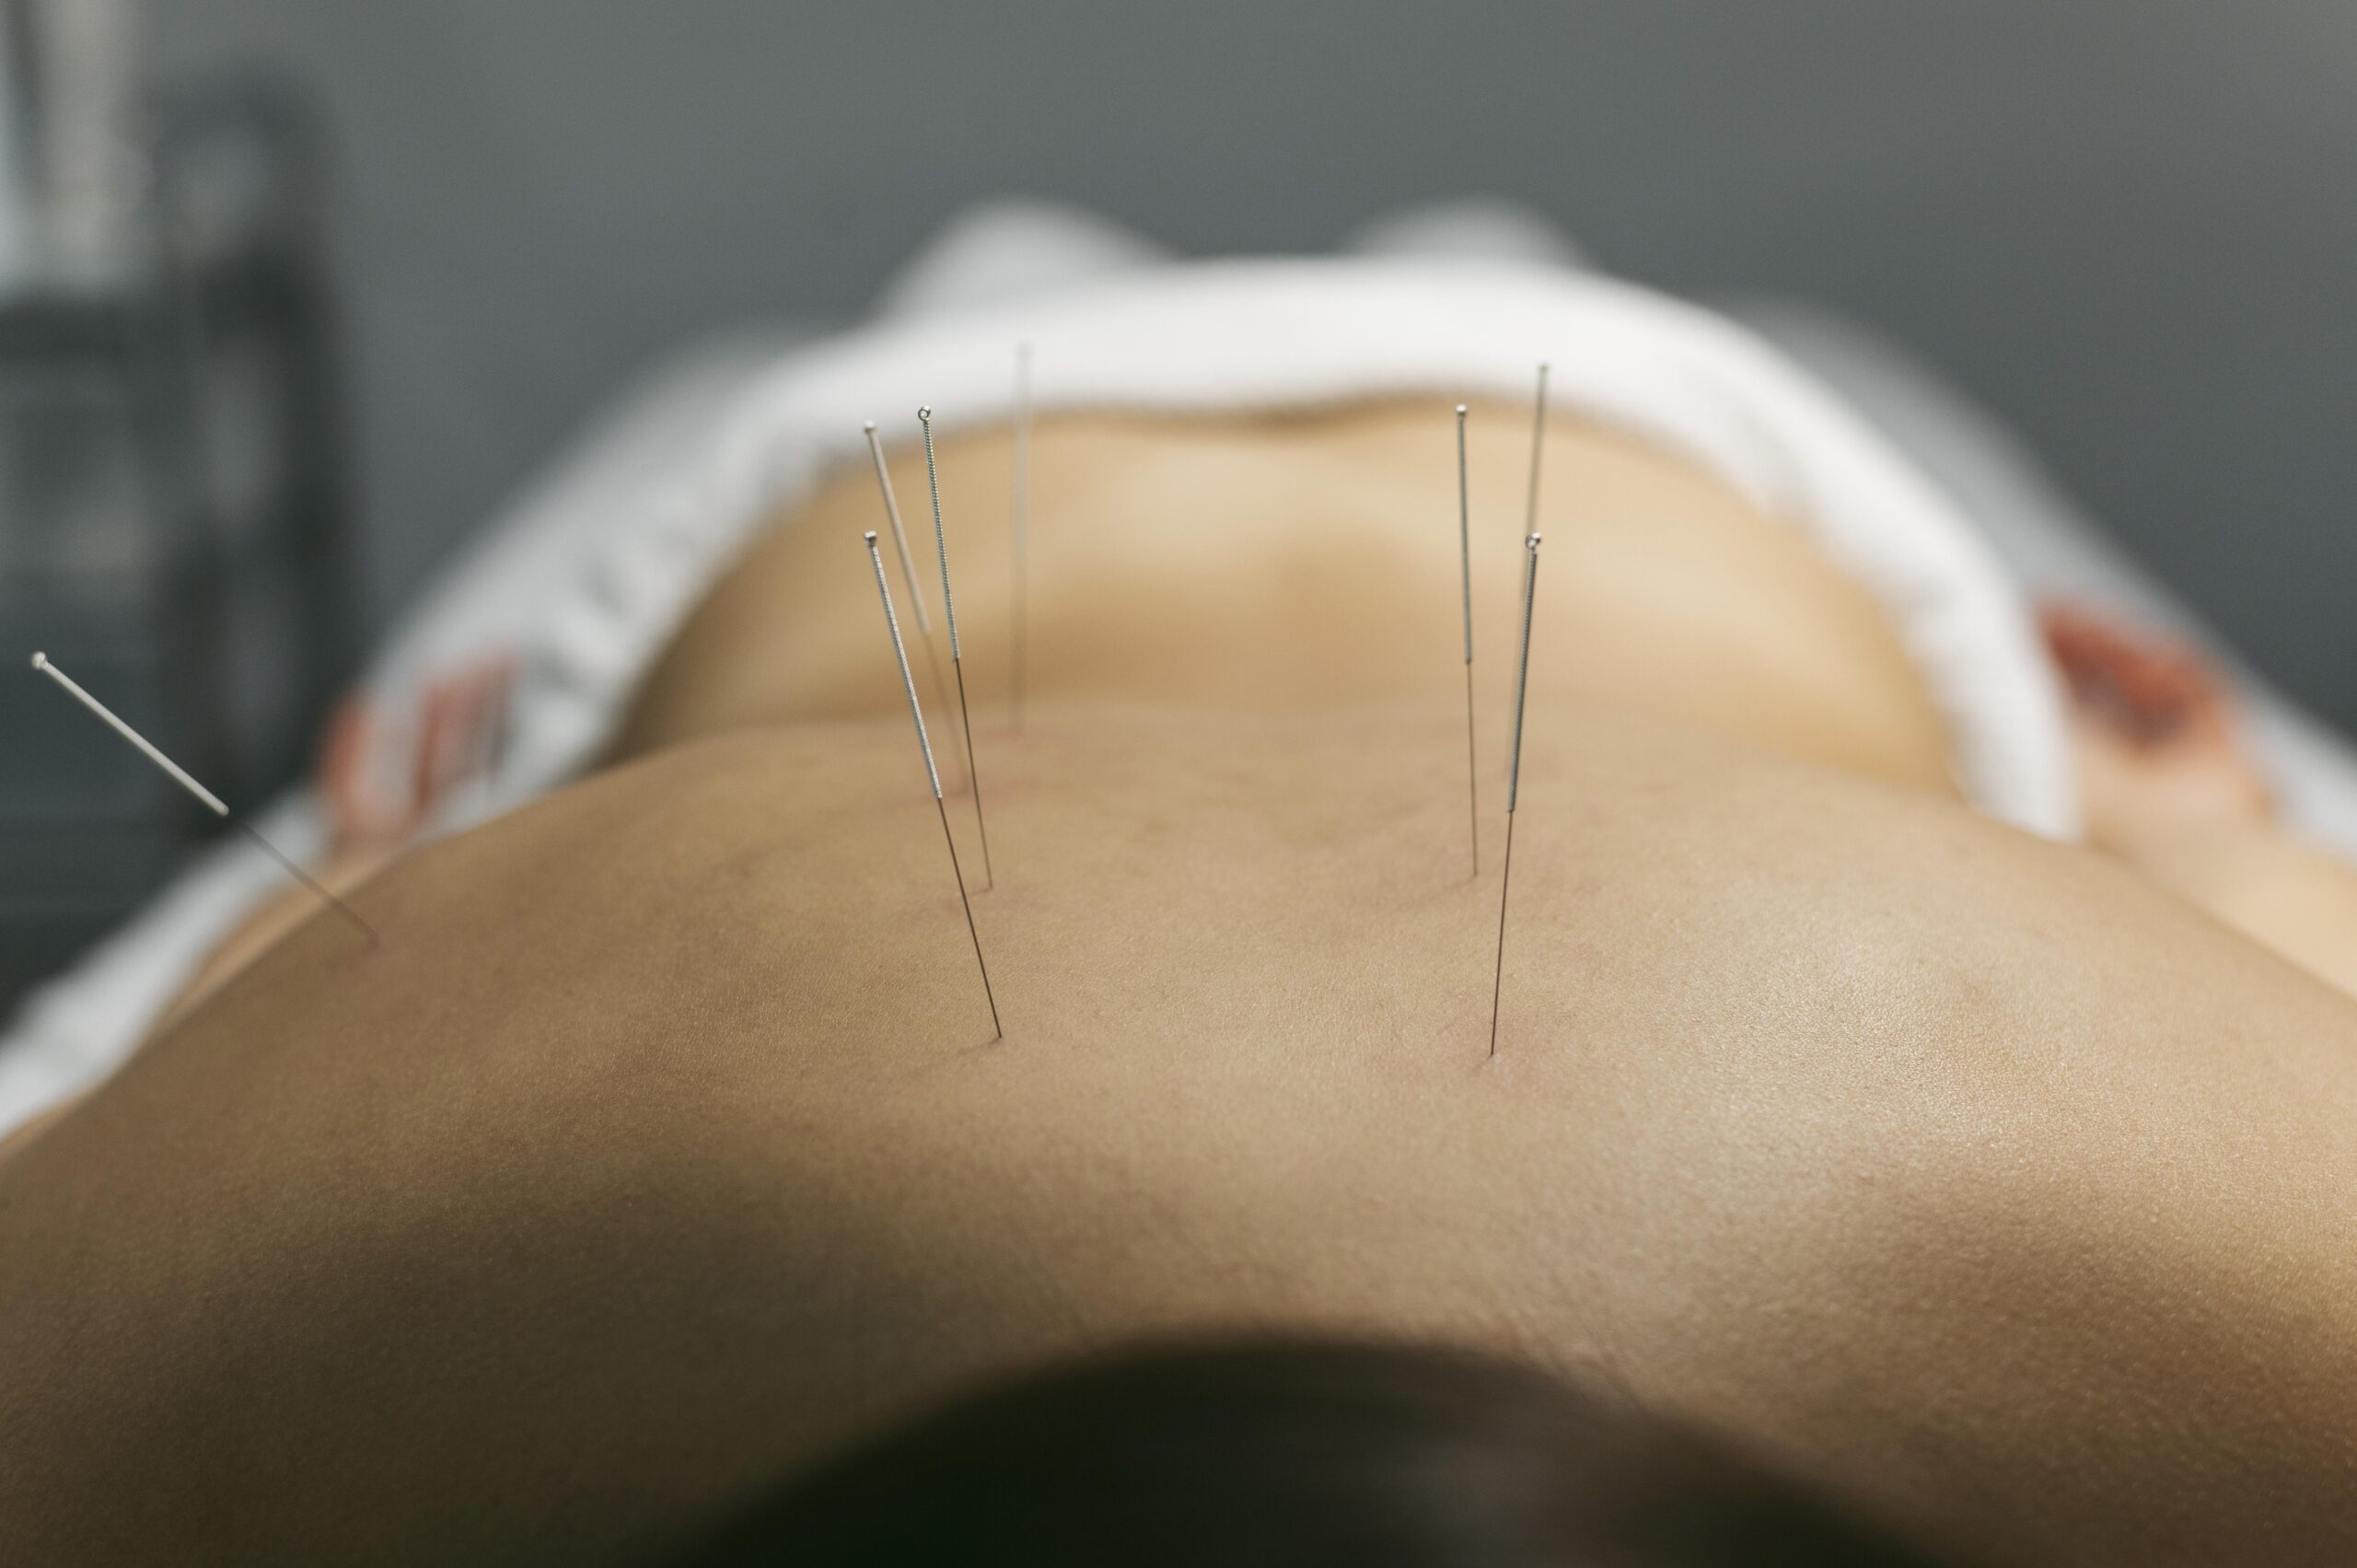 HOW TO USE ACUPUNCTURE FOR CHRONIC PAIN MANAGEMENT